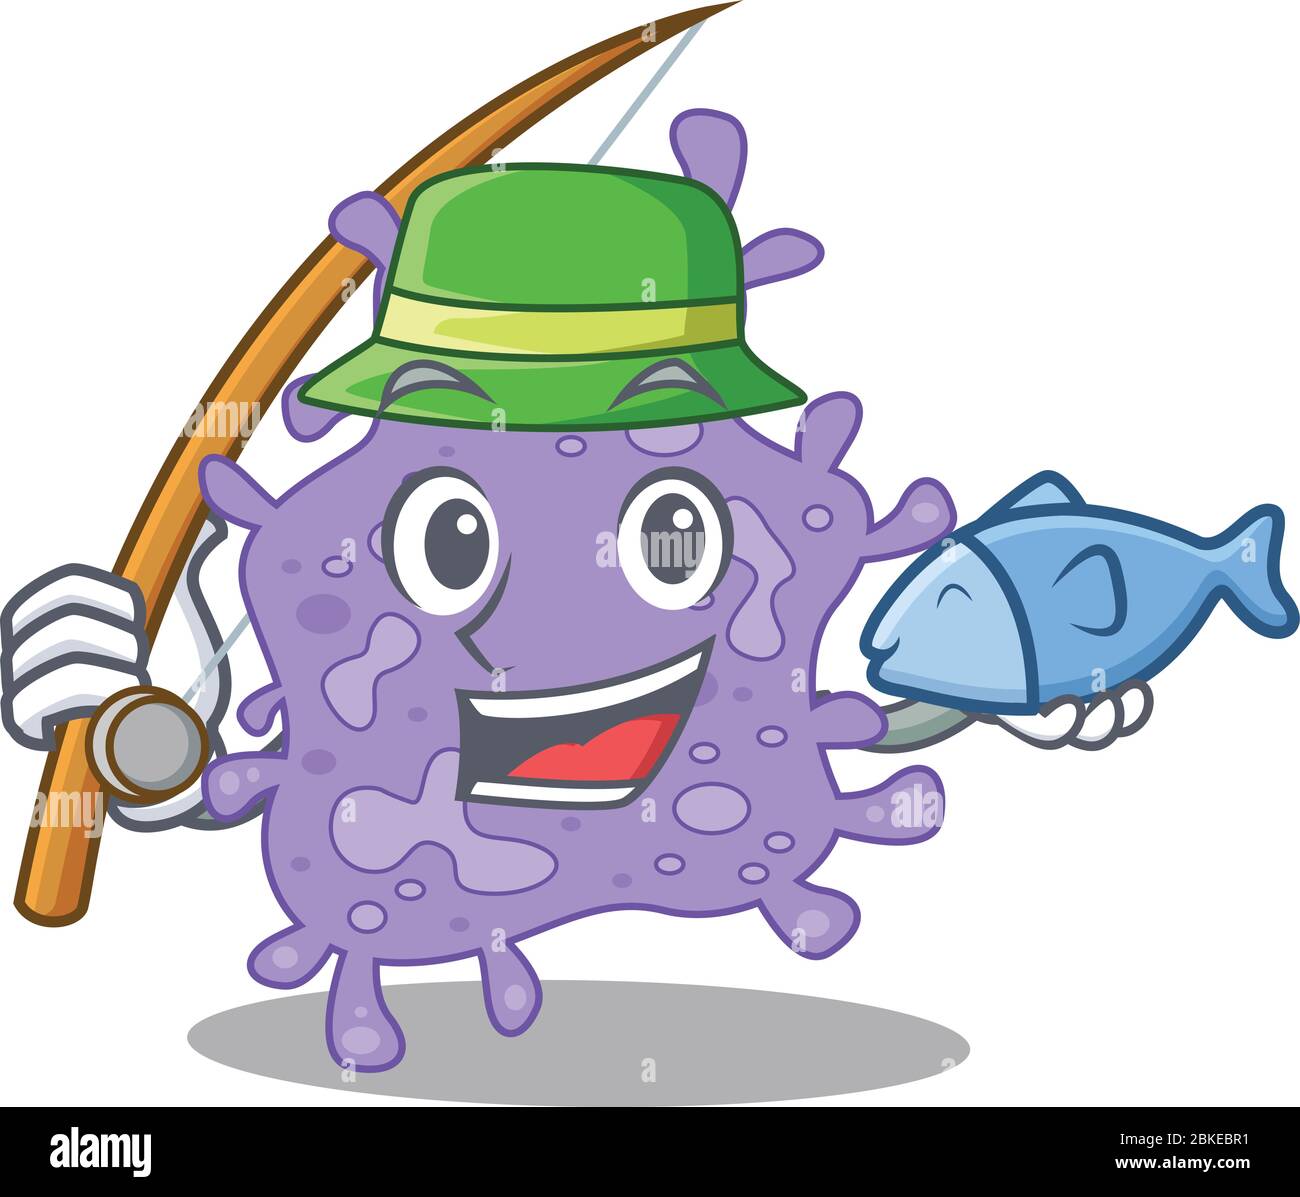 Cartoon design concept of staphylococcus aureus while fishing Stock Vector